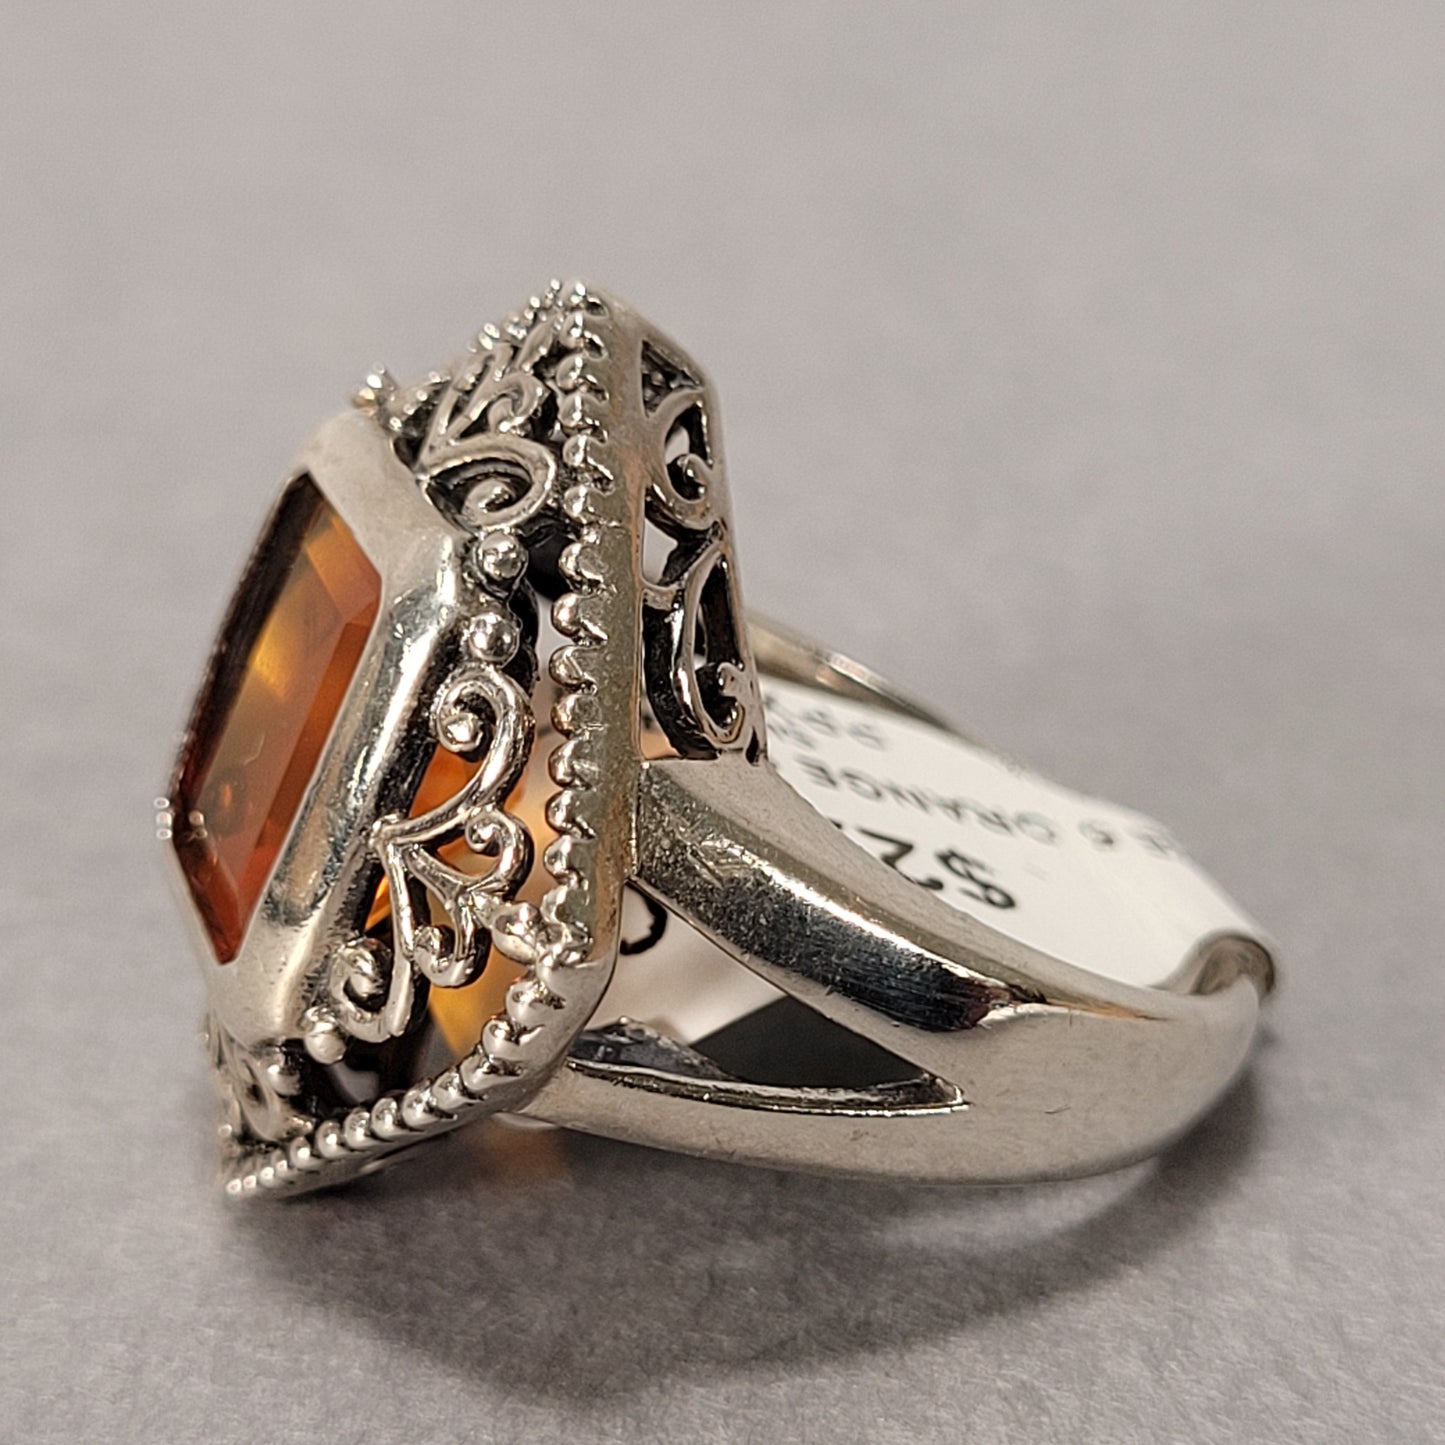 Sterling Silver Ring With Orange Stone